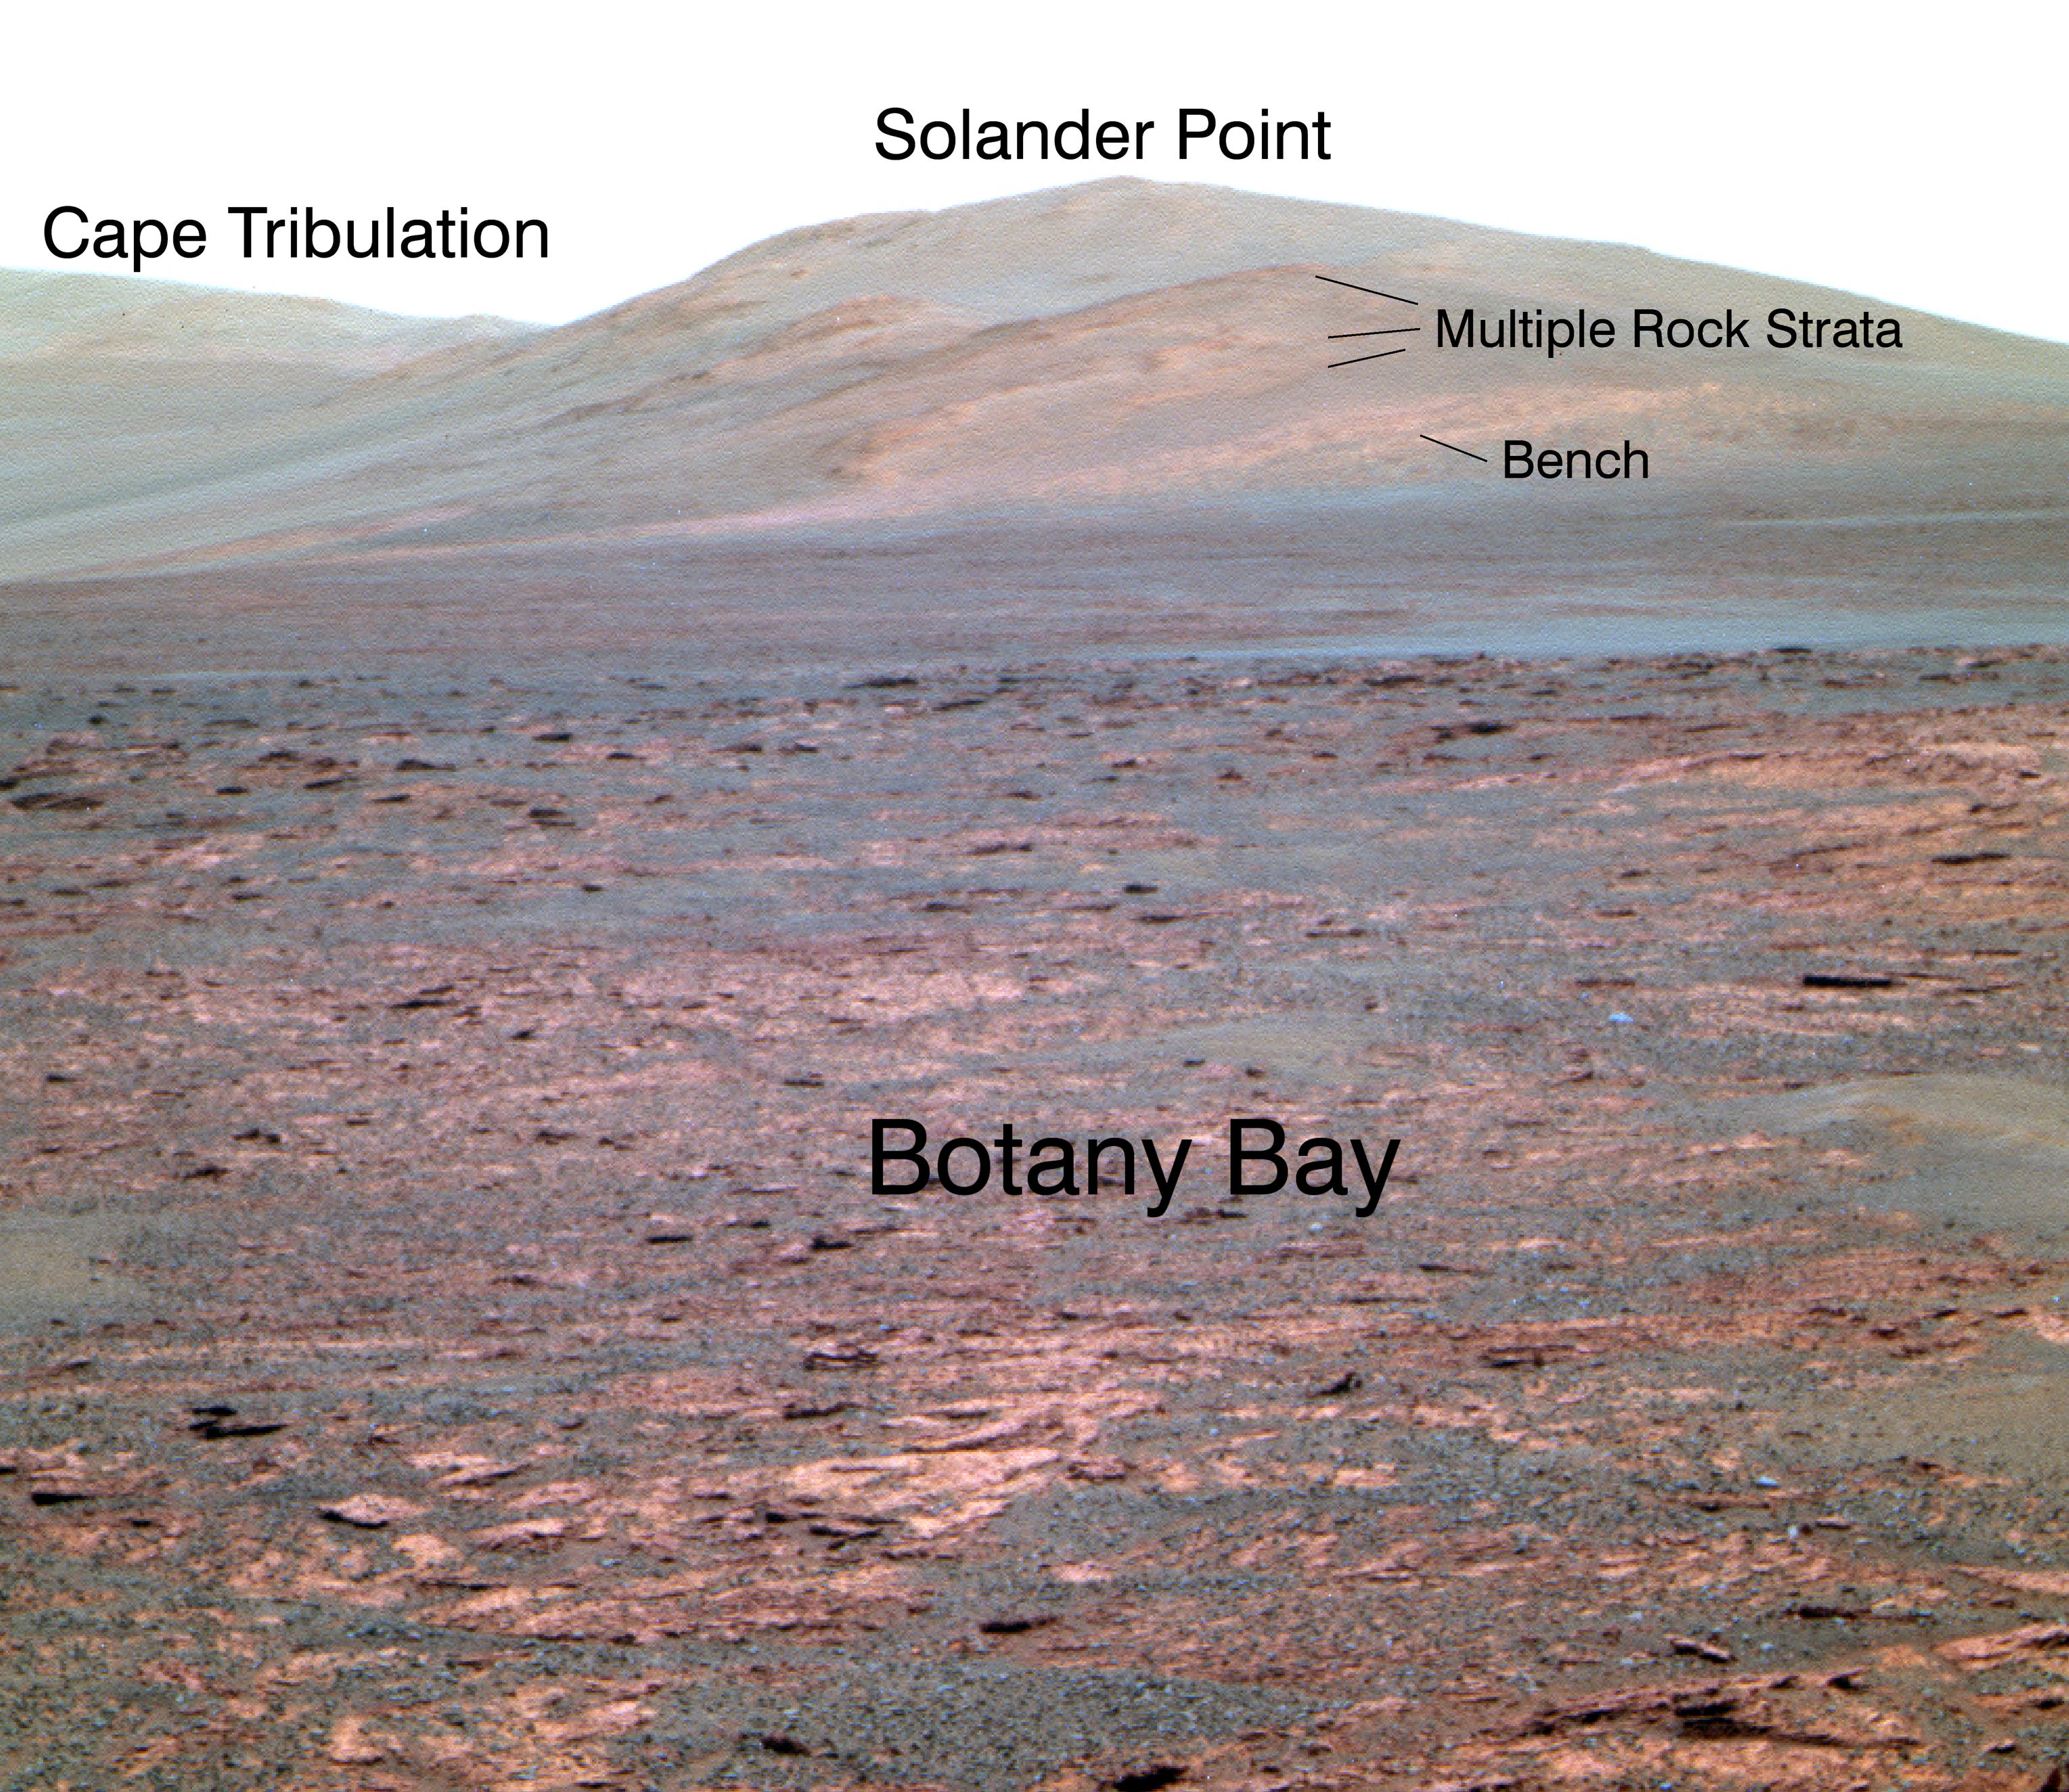 Opportunity's view of 'Solander Point' (False Color, Annotated)